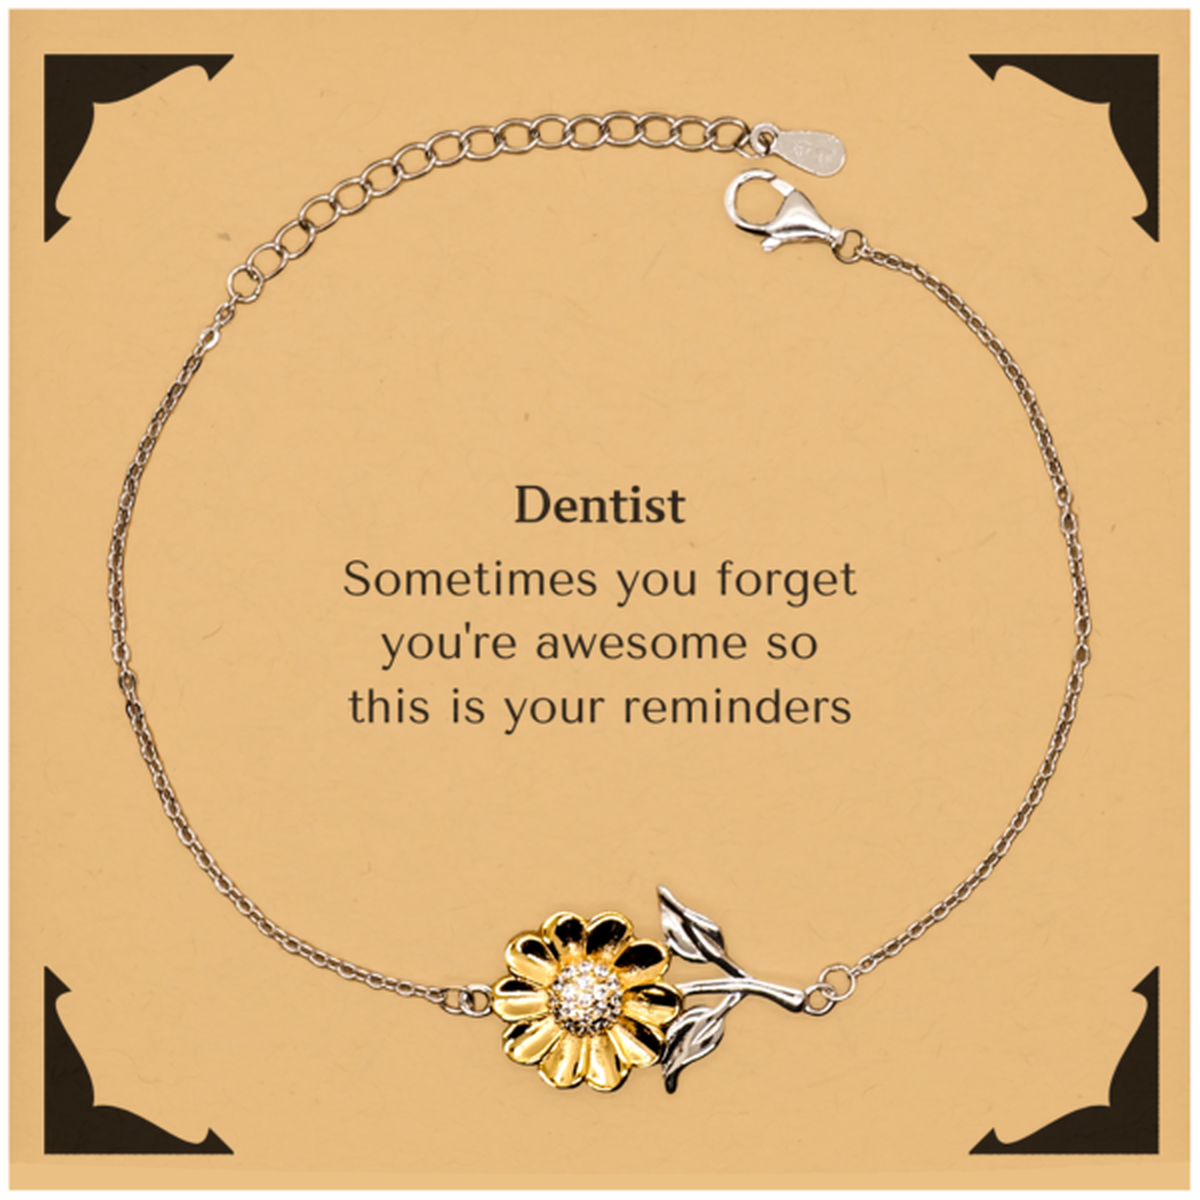 Sentimental Dentist Sunflower Bracelet, Dentist Sometimes you forget you're awesome so this is your reminders, Graduation Christmas Birthday Gifts for Dentist, Men, Women, Coworkers